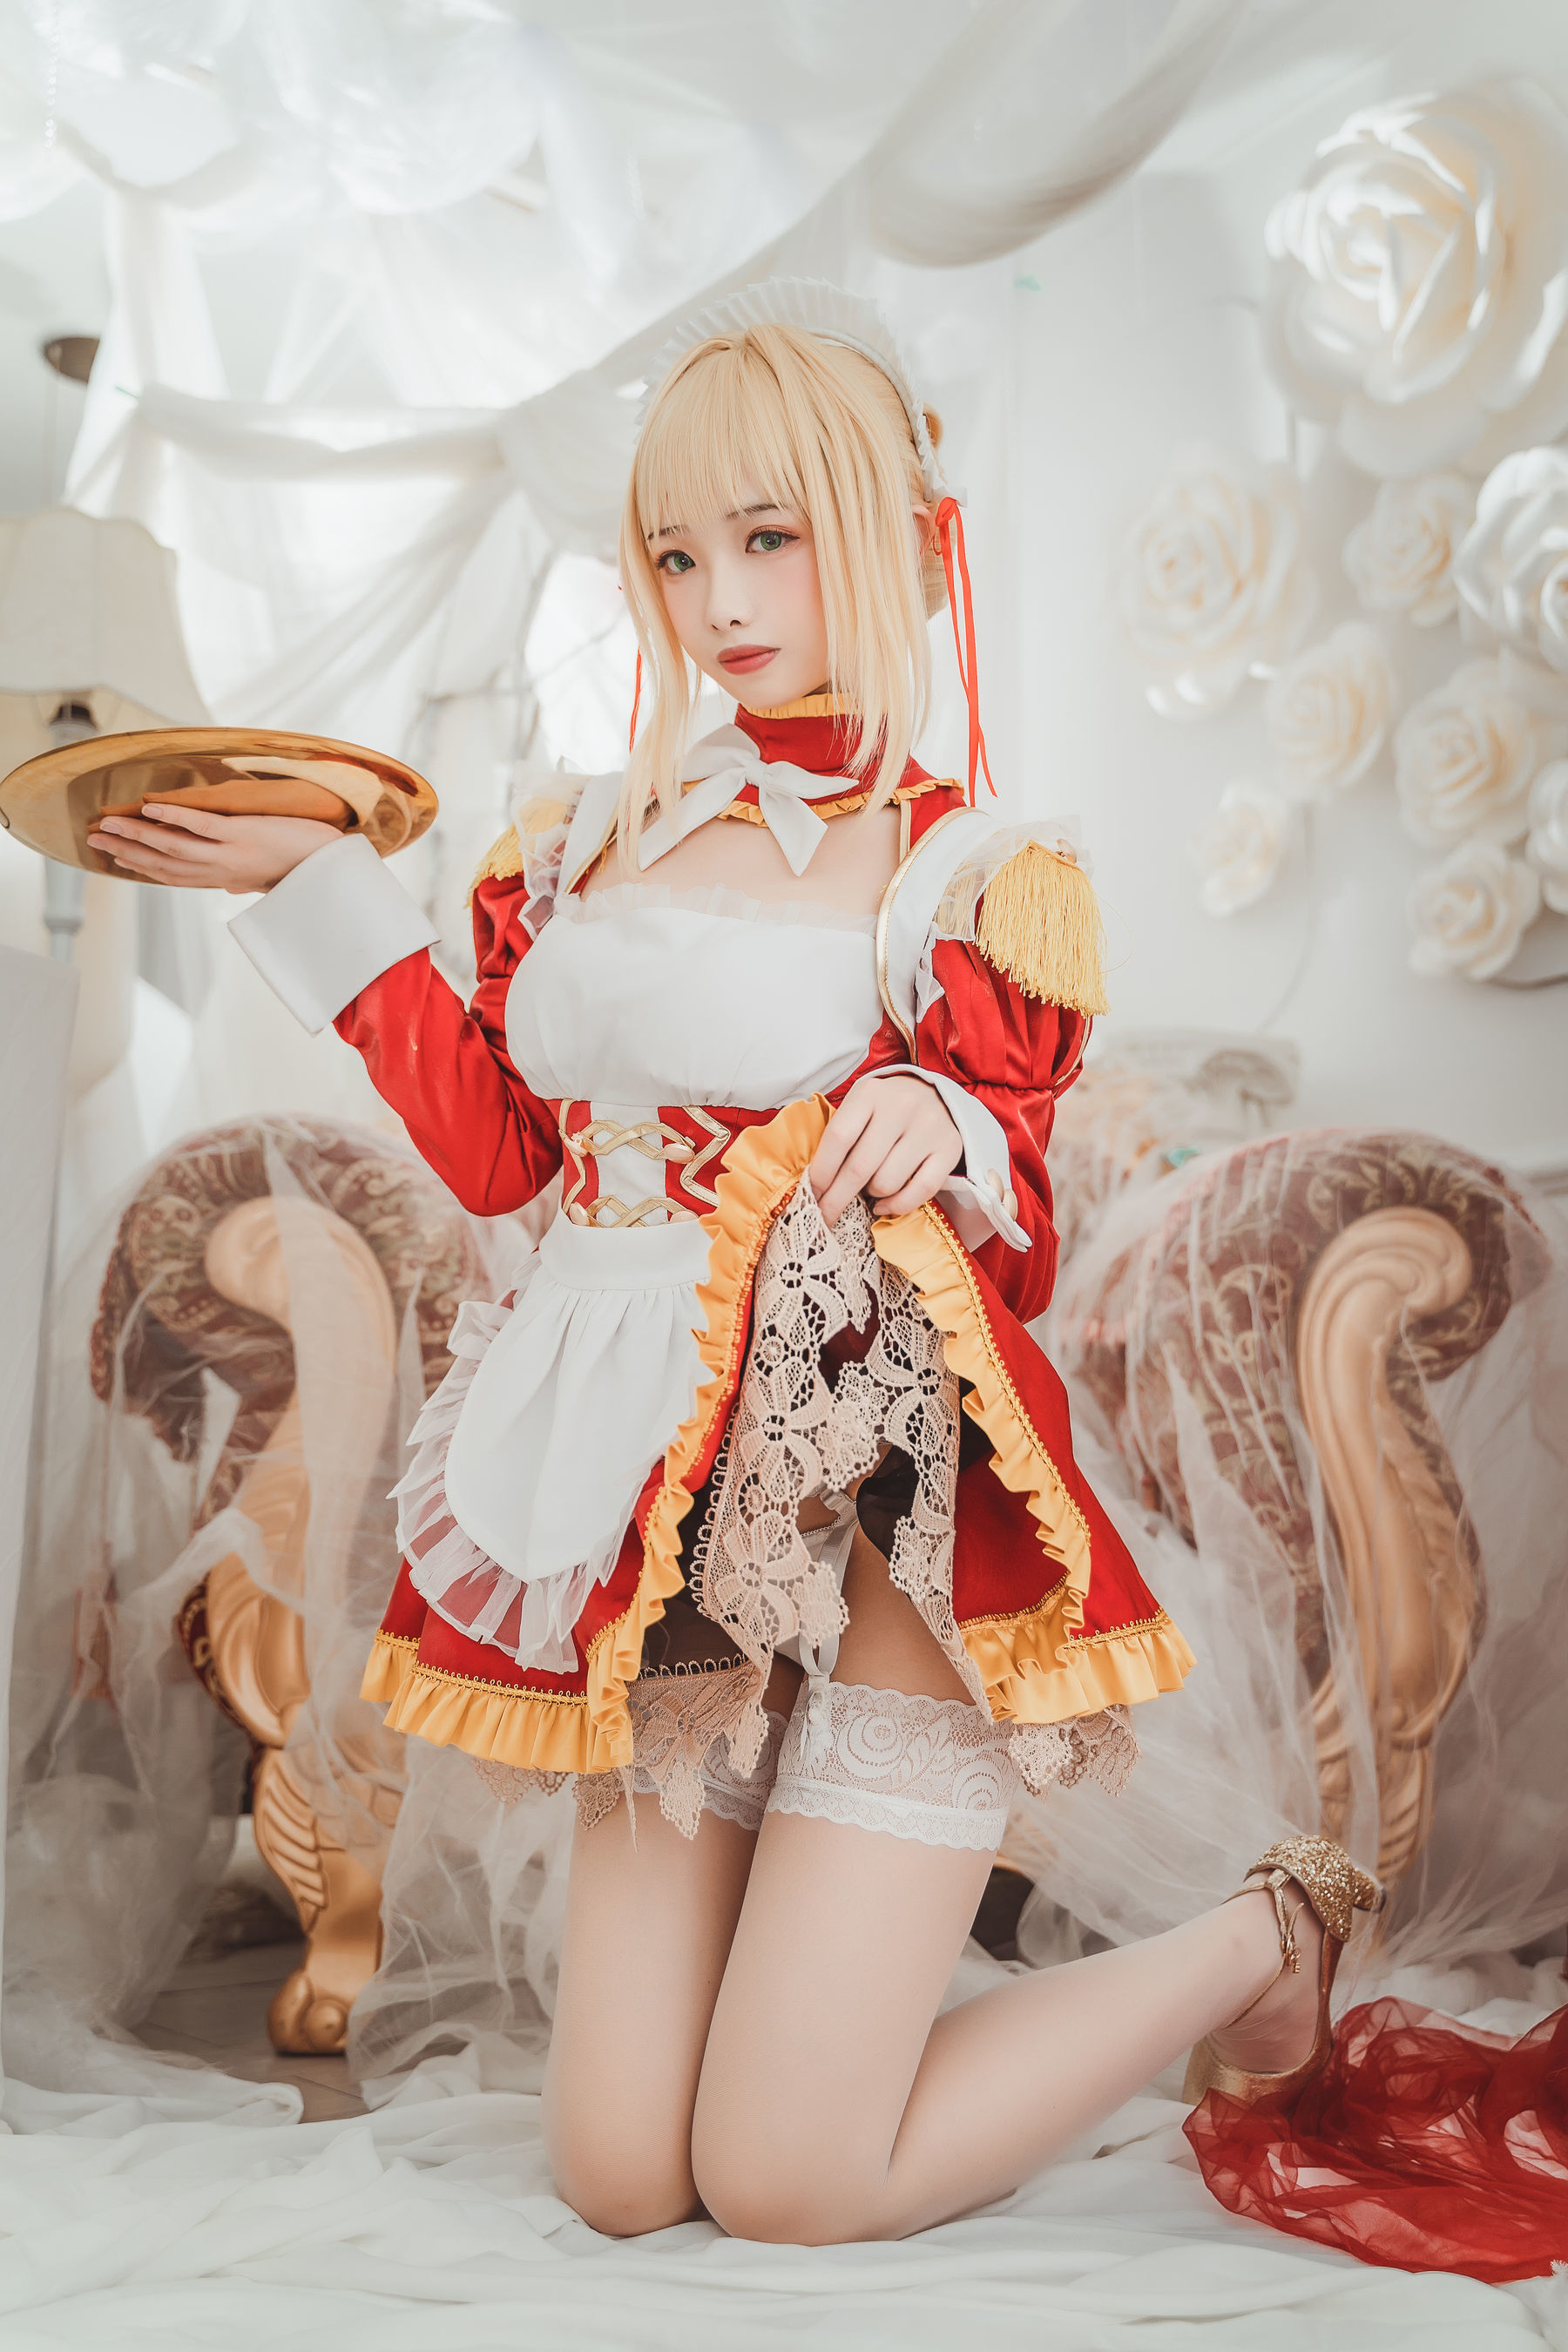 [Beauty Coser] Wenmei "The Maid of Nero" Page 10 No.13df0c